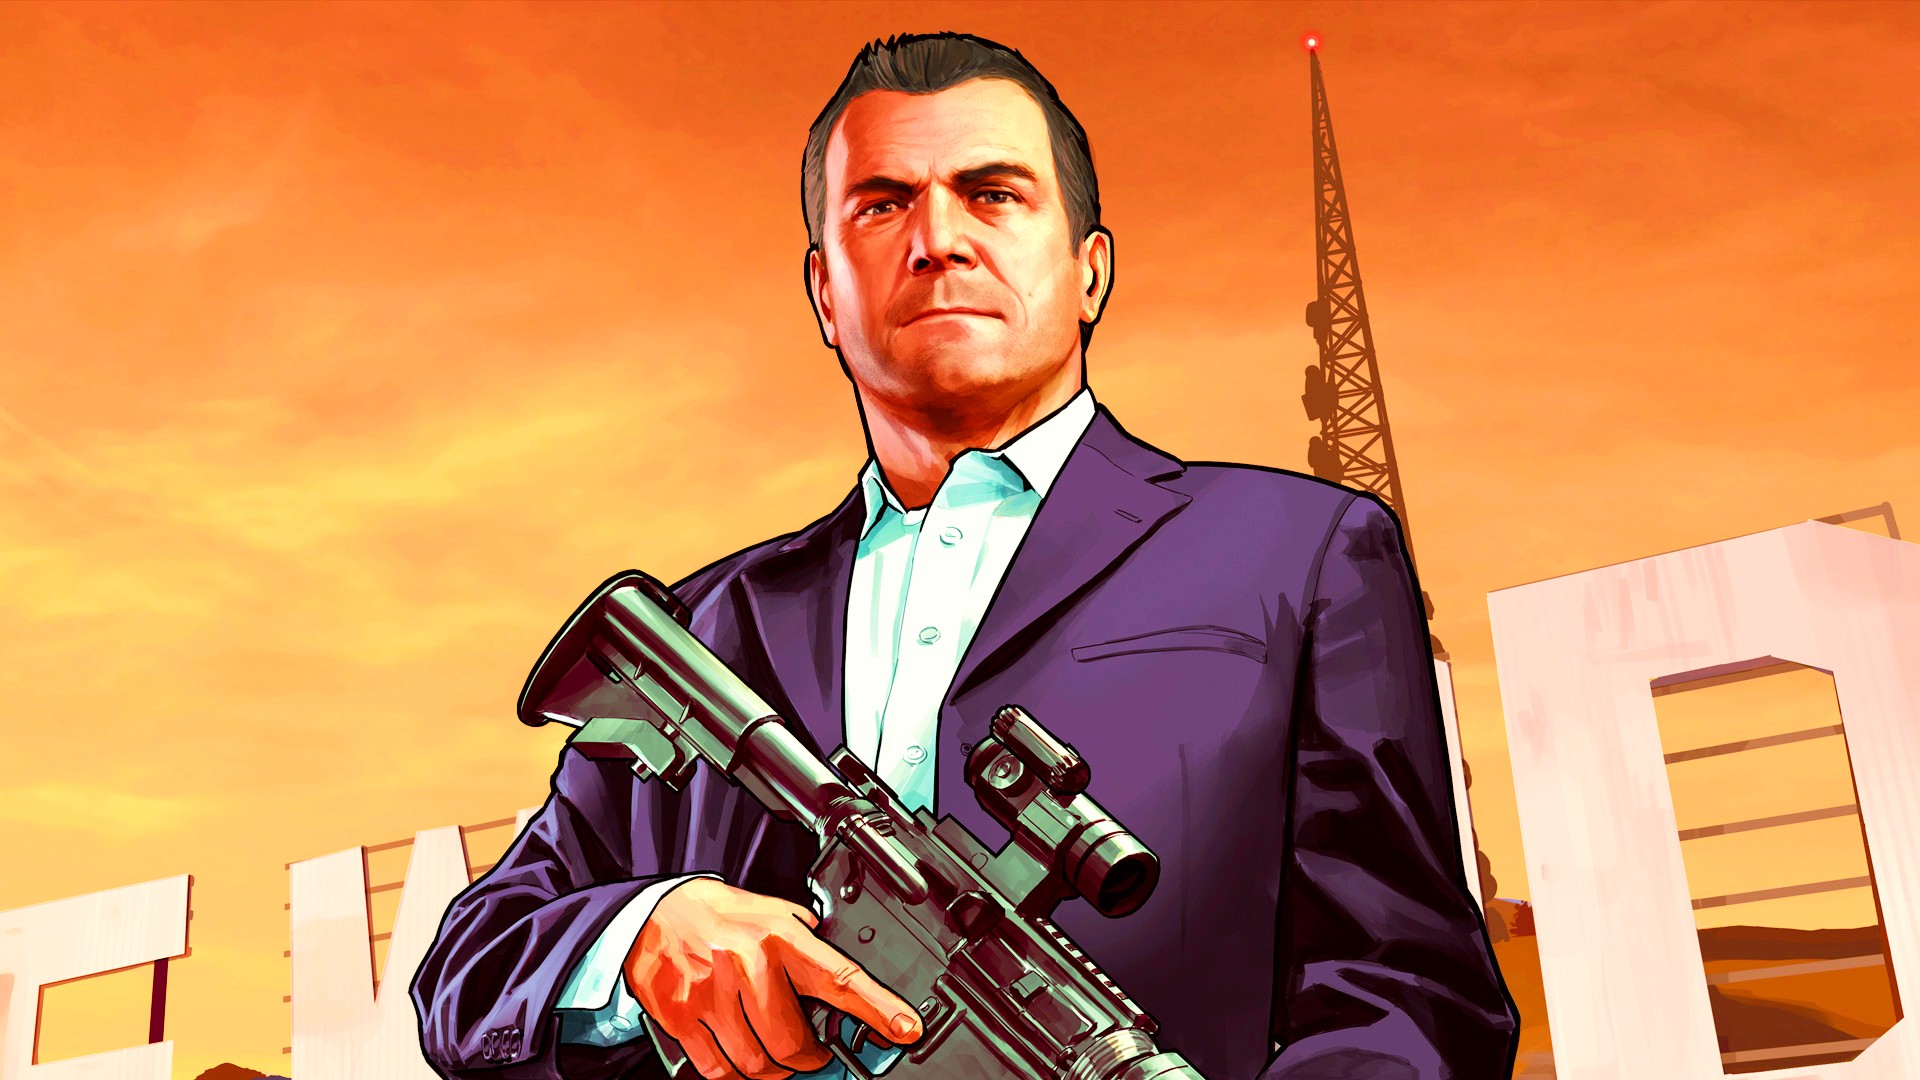 GTA 6 likely entering next phase, as Rockstar posts dozens of jobs